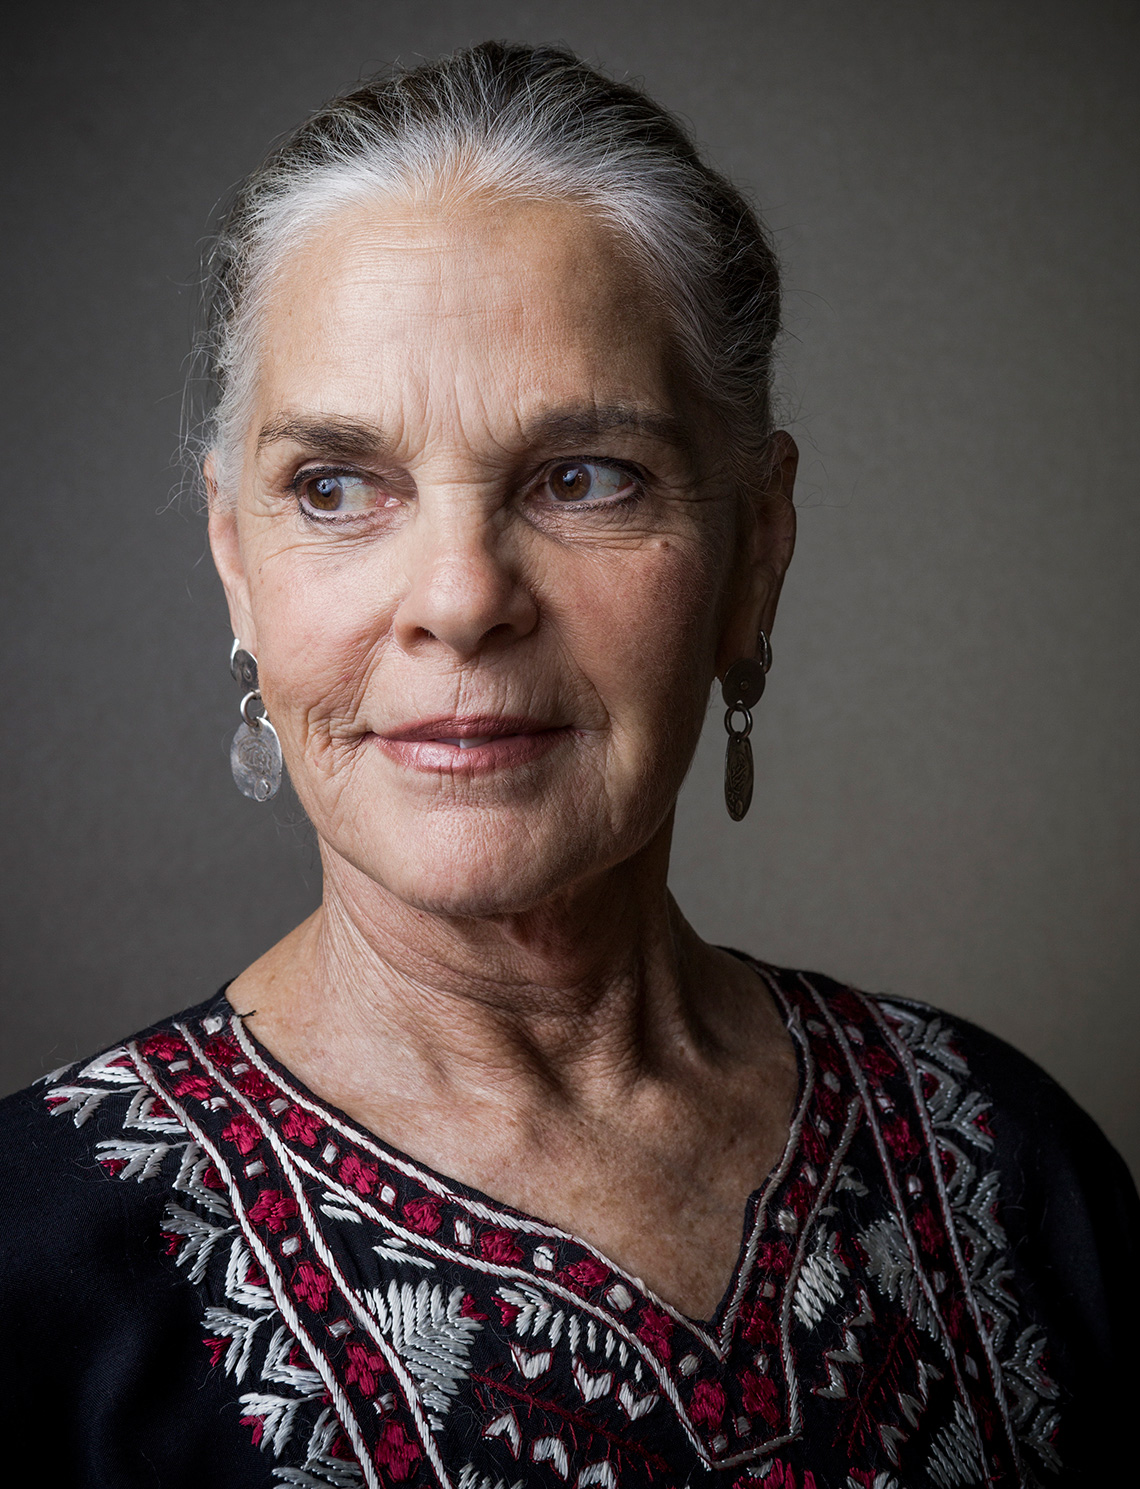 How tall is Ali MacGraw?